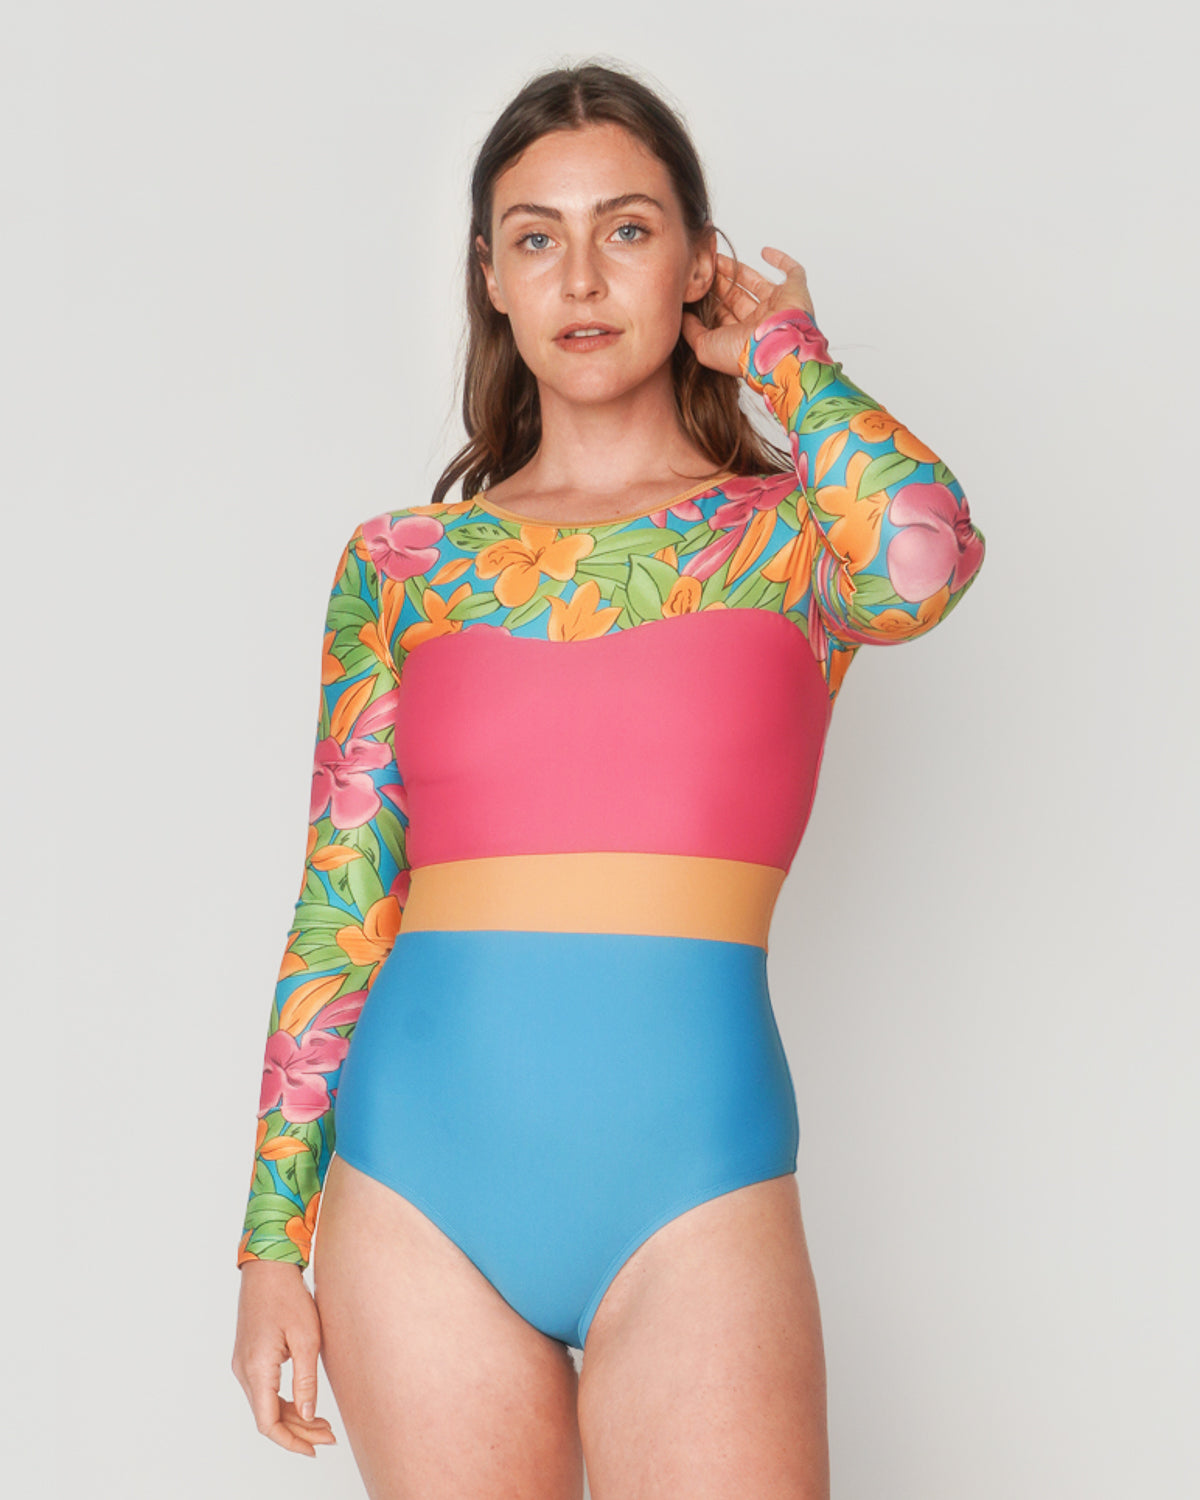 Women's Surf Suits & Long Sleeve Swimsuits